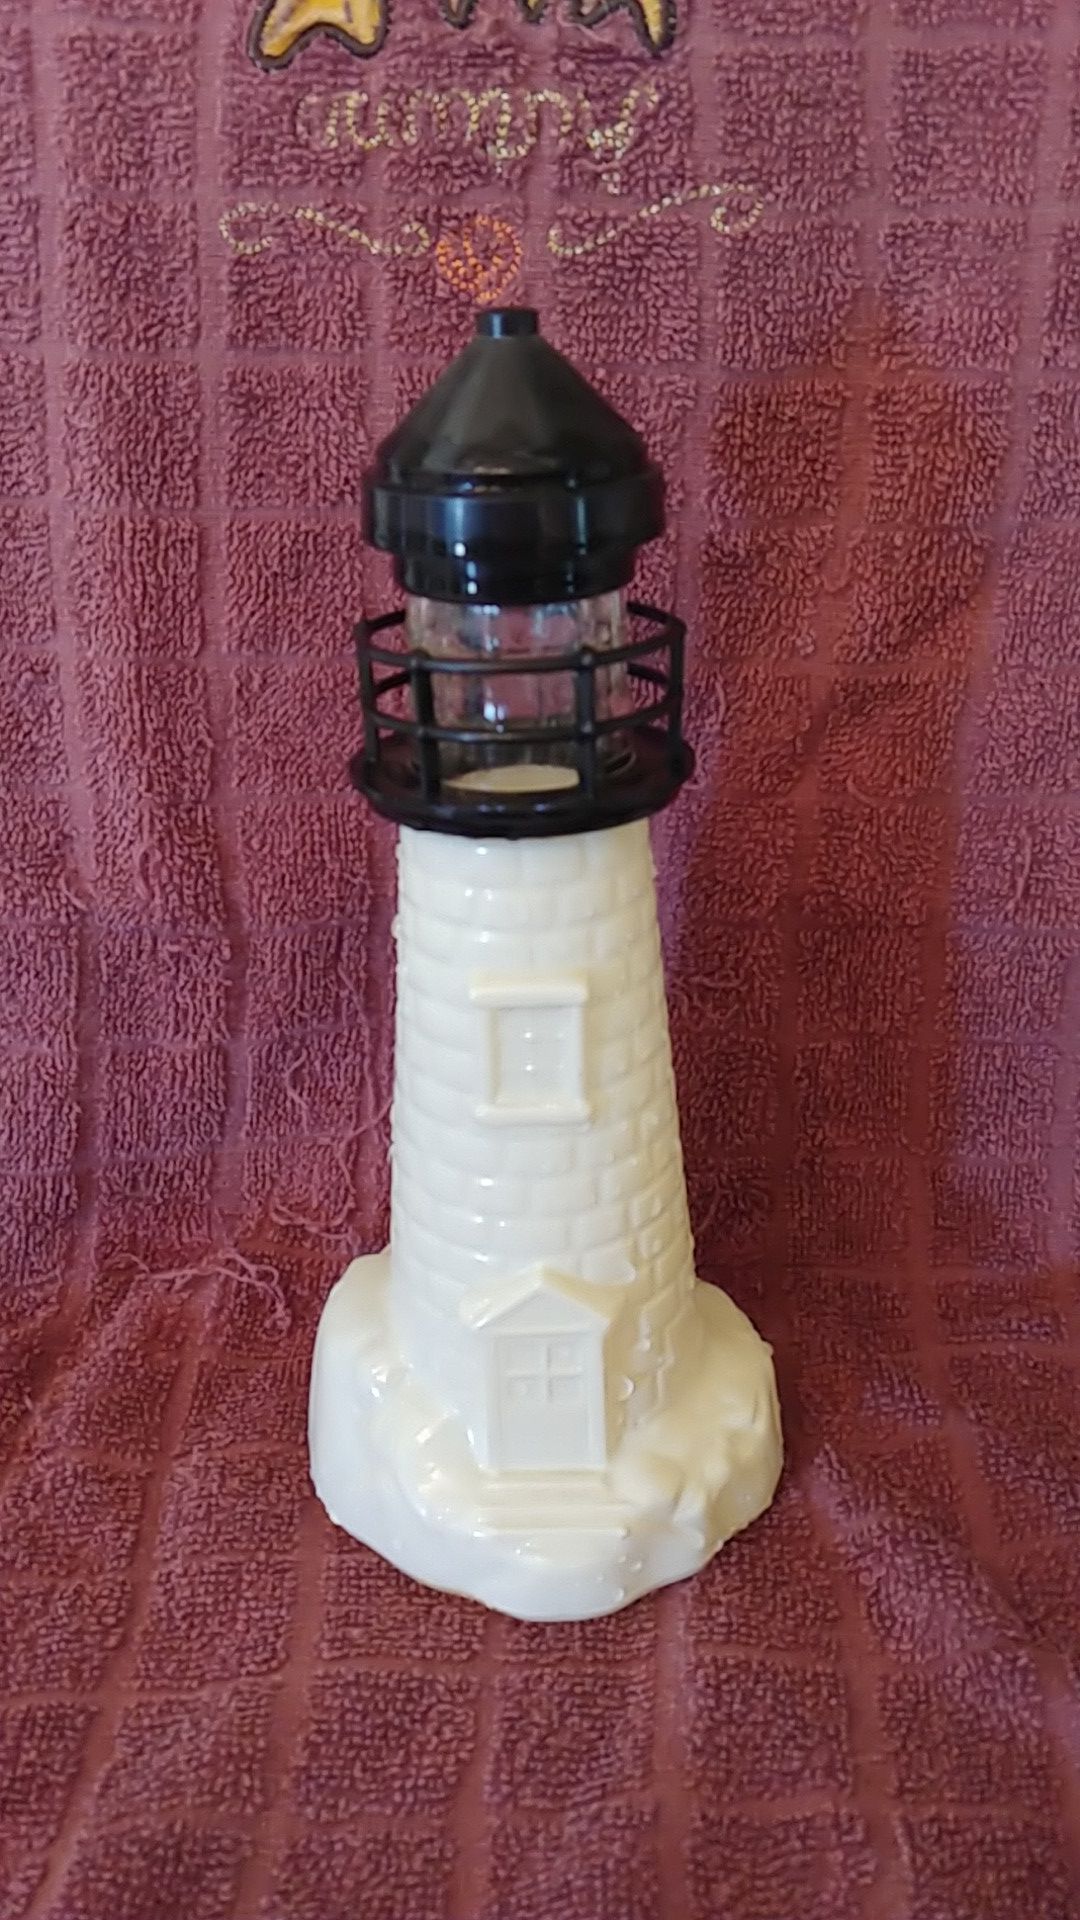 Old Spice collectible / light house